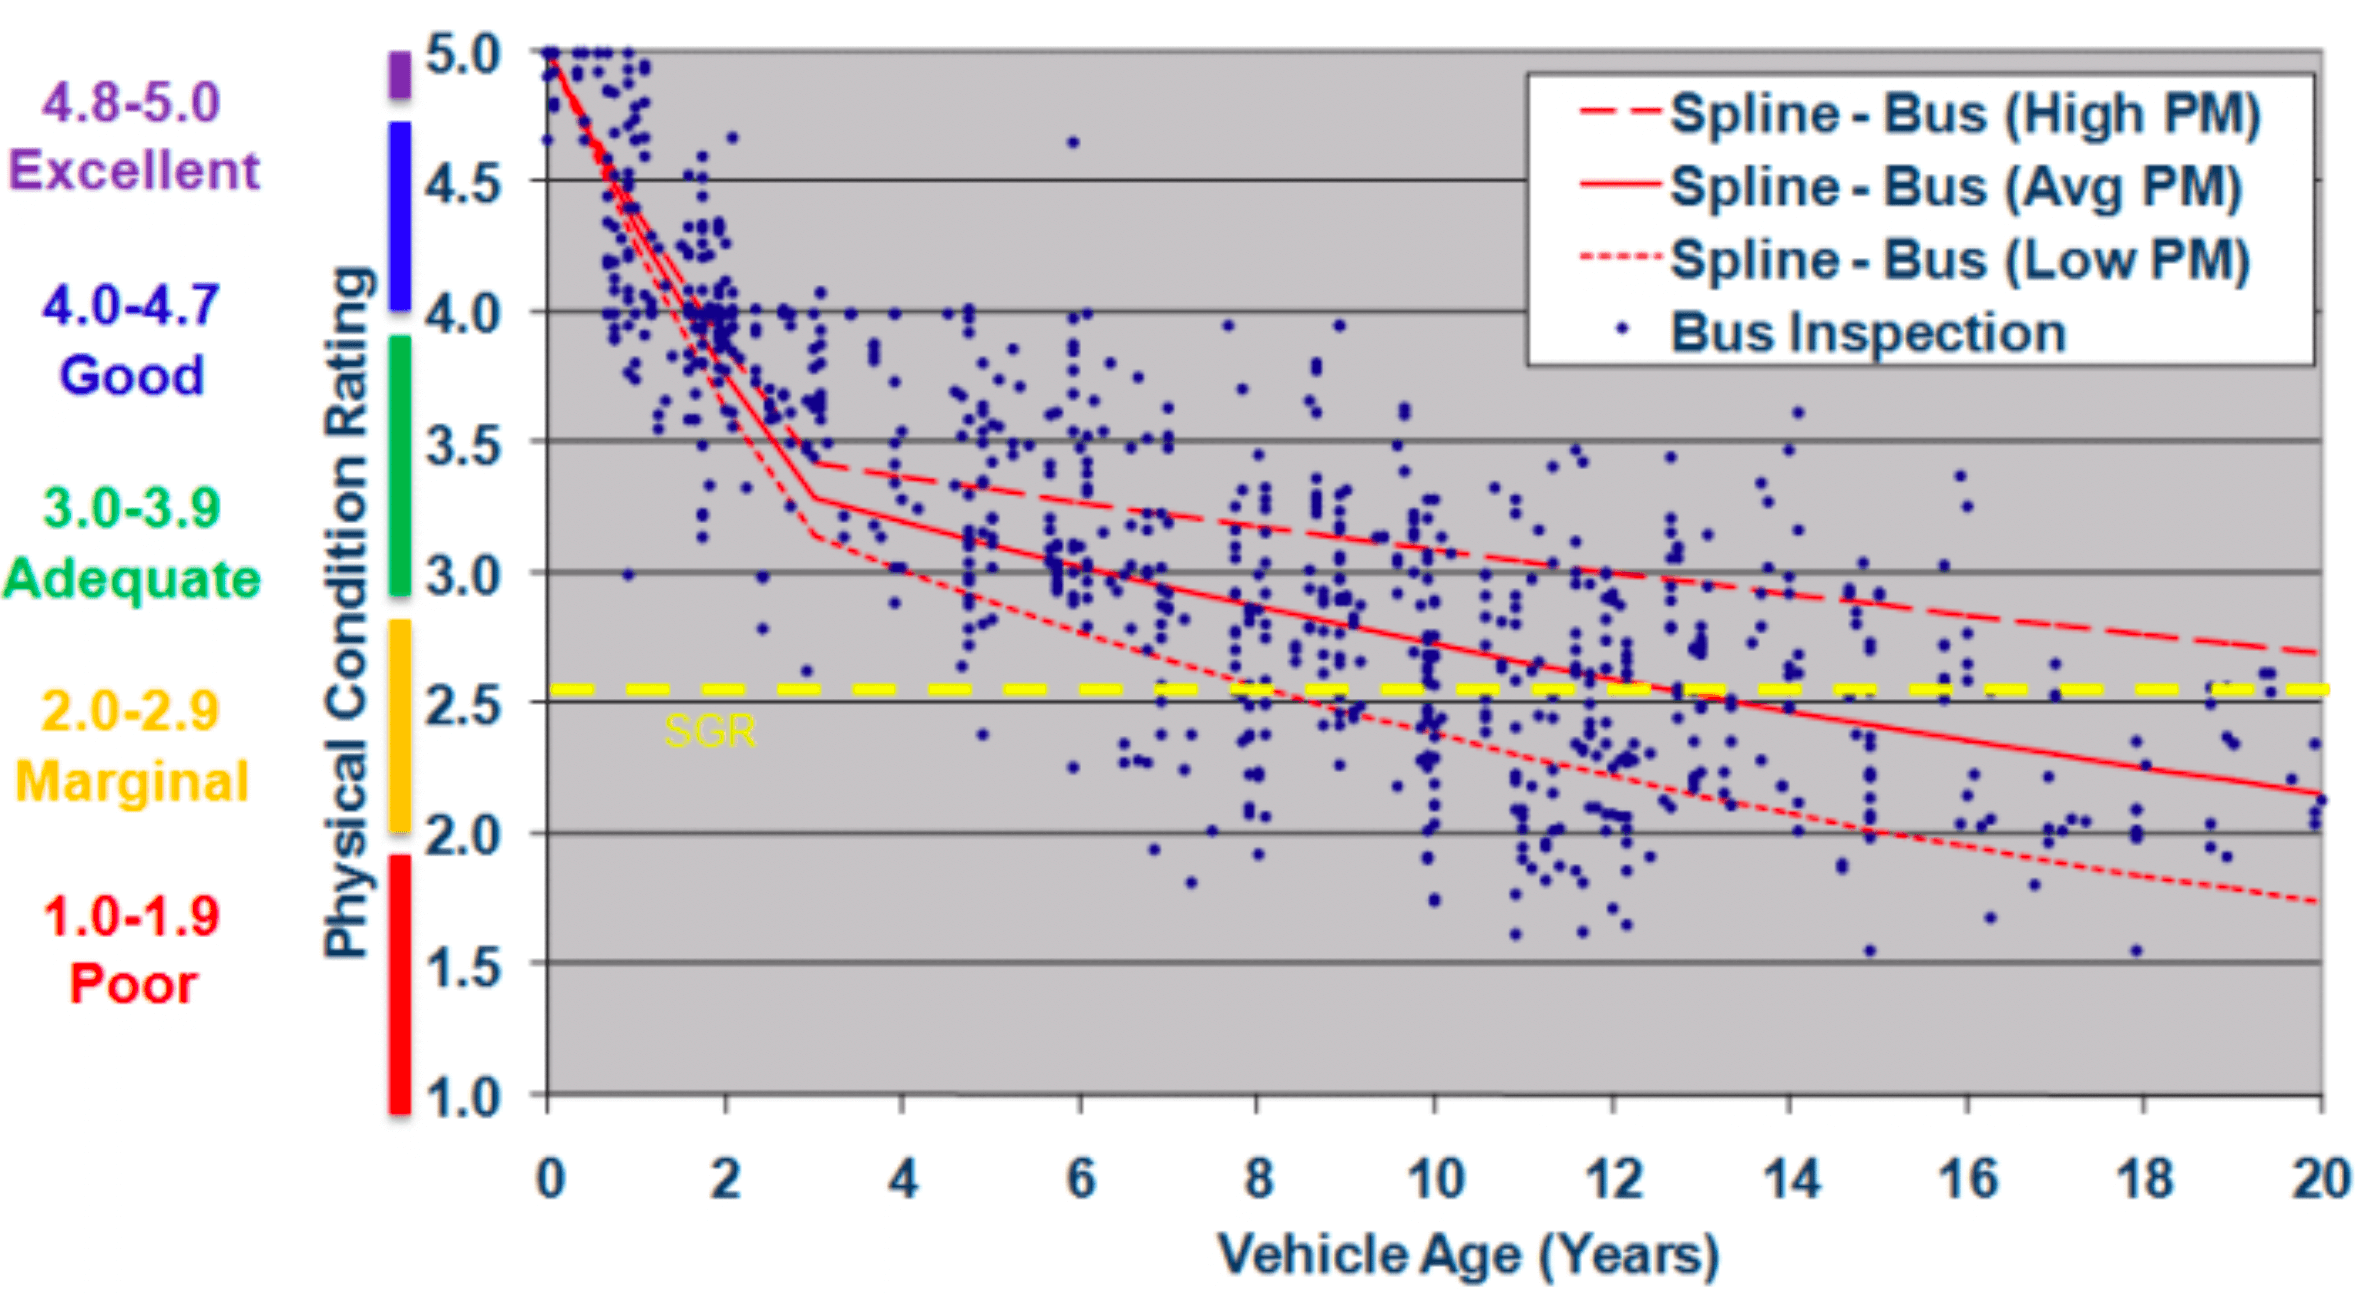 A scatter plot shows distribution of physical condition ratings over vehicle age of buses from 0 to 20 years. Physical condition ratings are defined as poor, marginal, adequate, good, or excellent, from 1.0 to 5.0. Each data point represents a bus inspection, and three “spline” regression lines are shown: 1) high PM buses, 2) average PM buses, and 3) low PM buses. The regression lines show that physical condition declines rapidly from excellent to adequate between the ages of 0 to 3 years. Physical condition then experiences a more gradual decline between the ages of 3 and 20 years, going from adequate to marginal condition. The graph also shows an SGR threshold of a 2.5 physical condition rating, which is defined as marginal. 